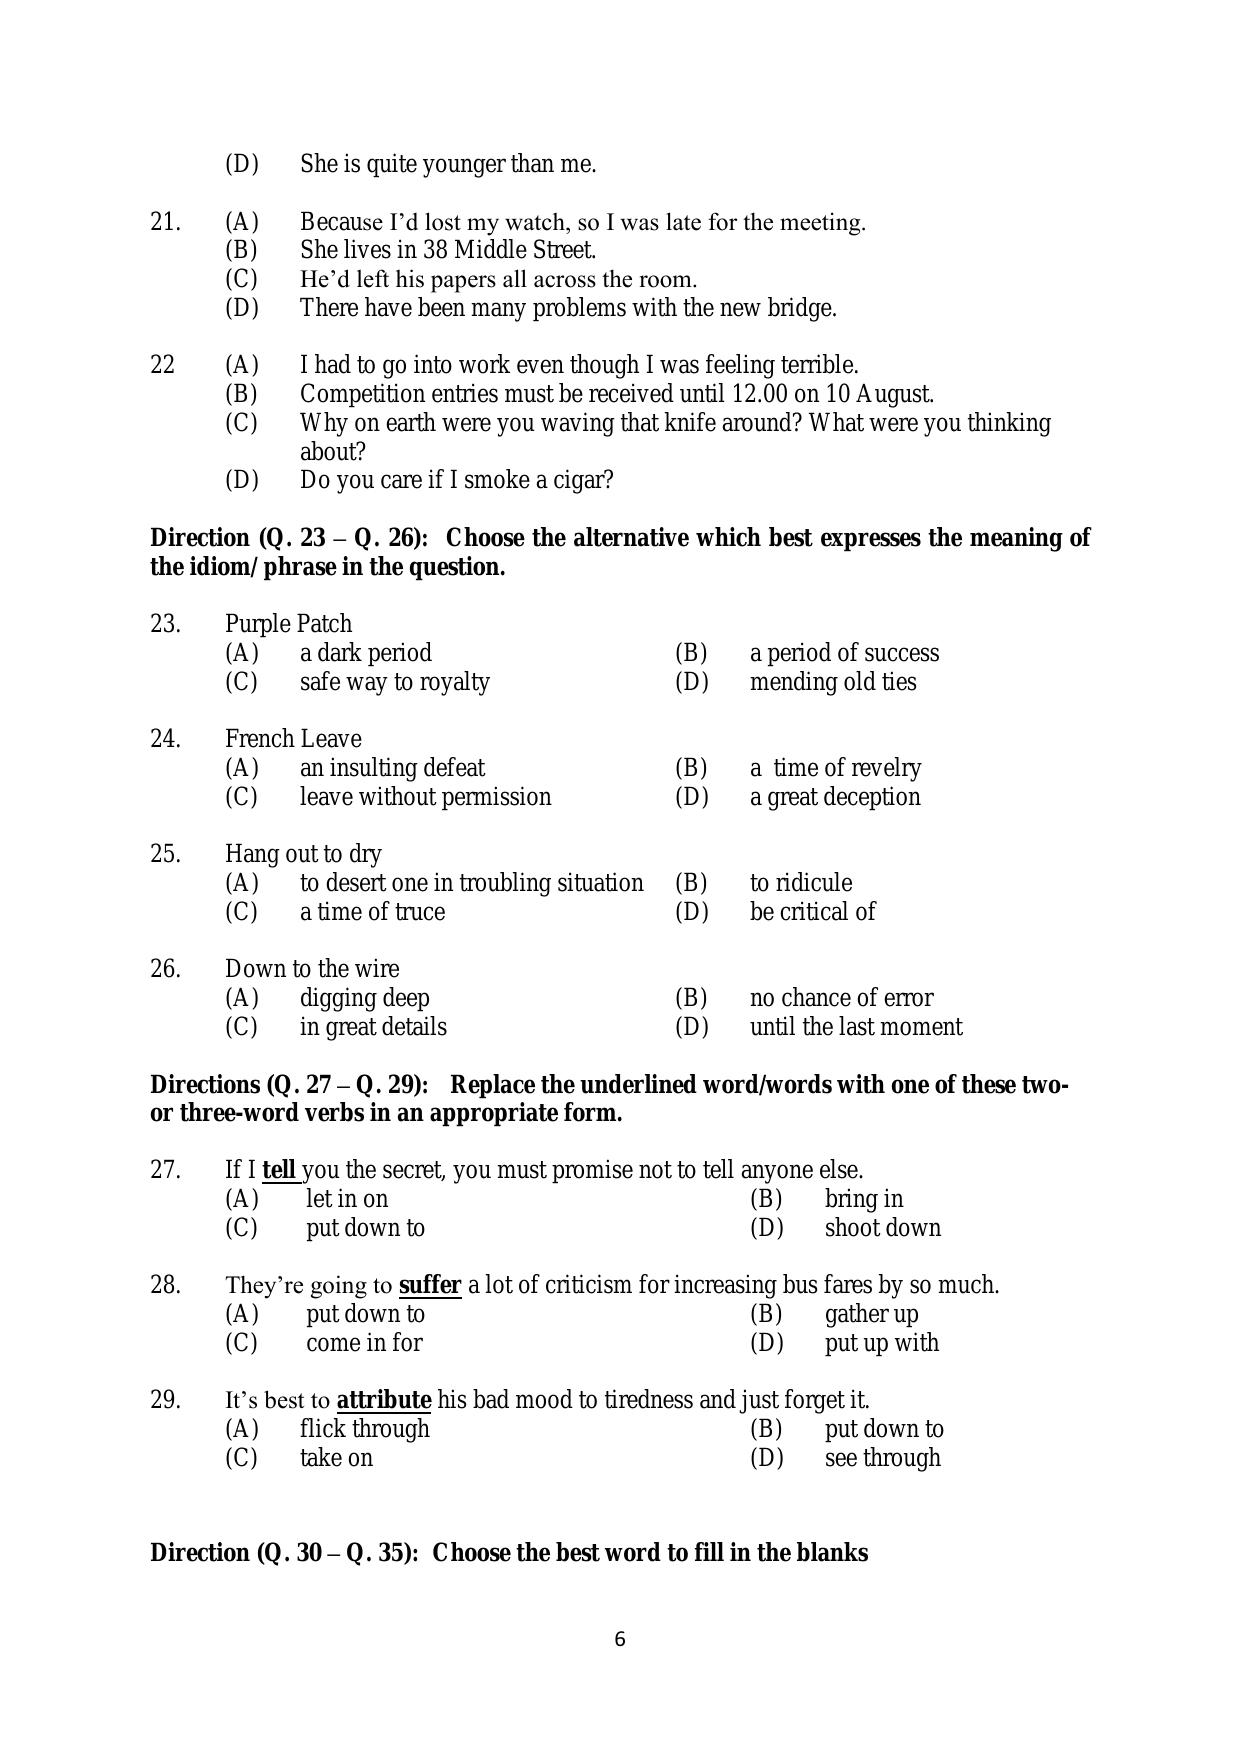 AILET 2020 Question Paper for BA LLB - Page 6